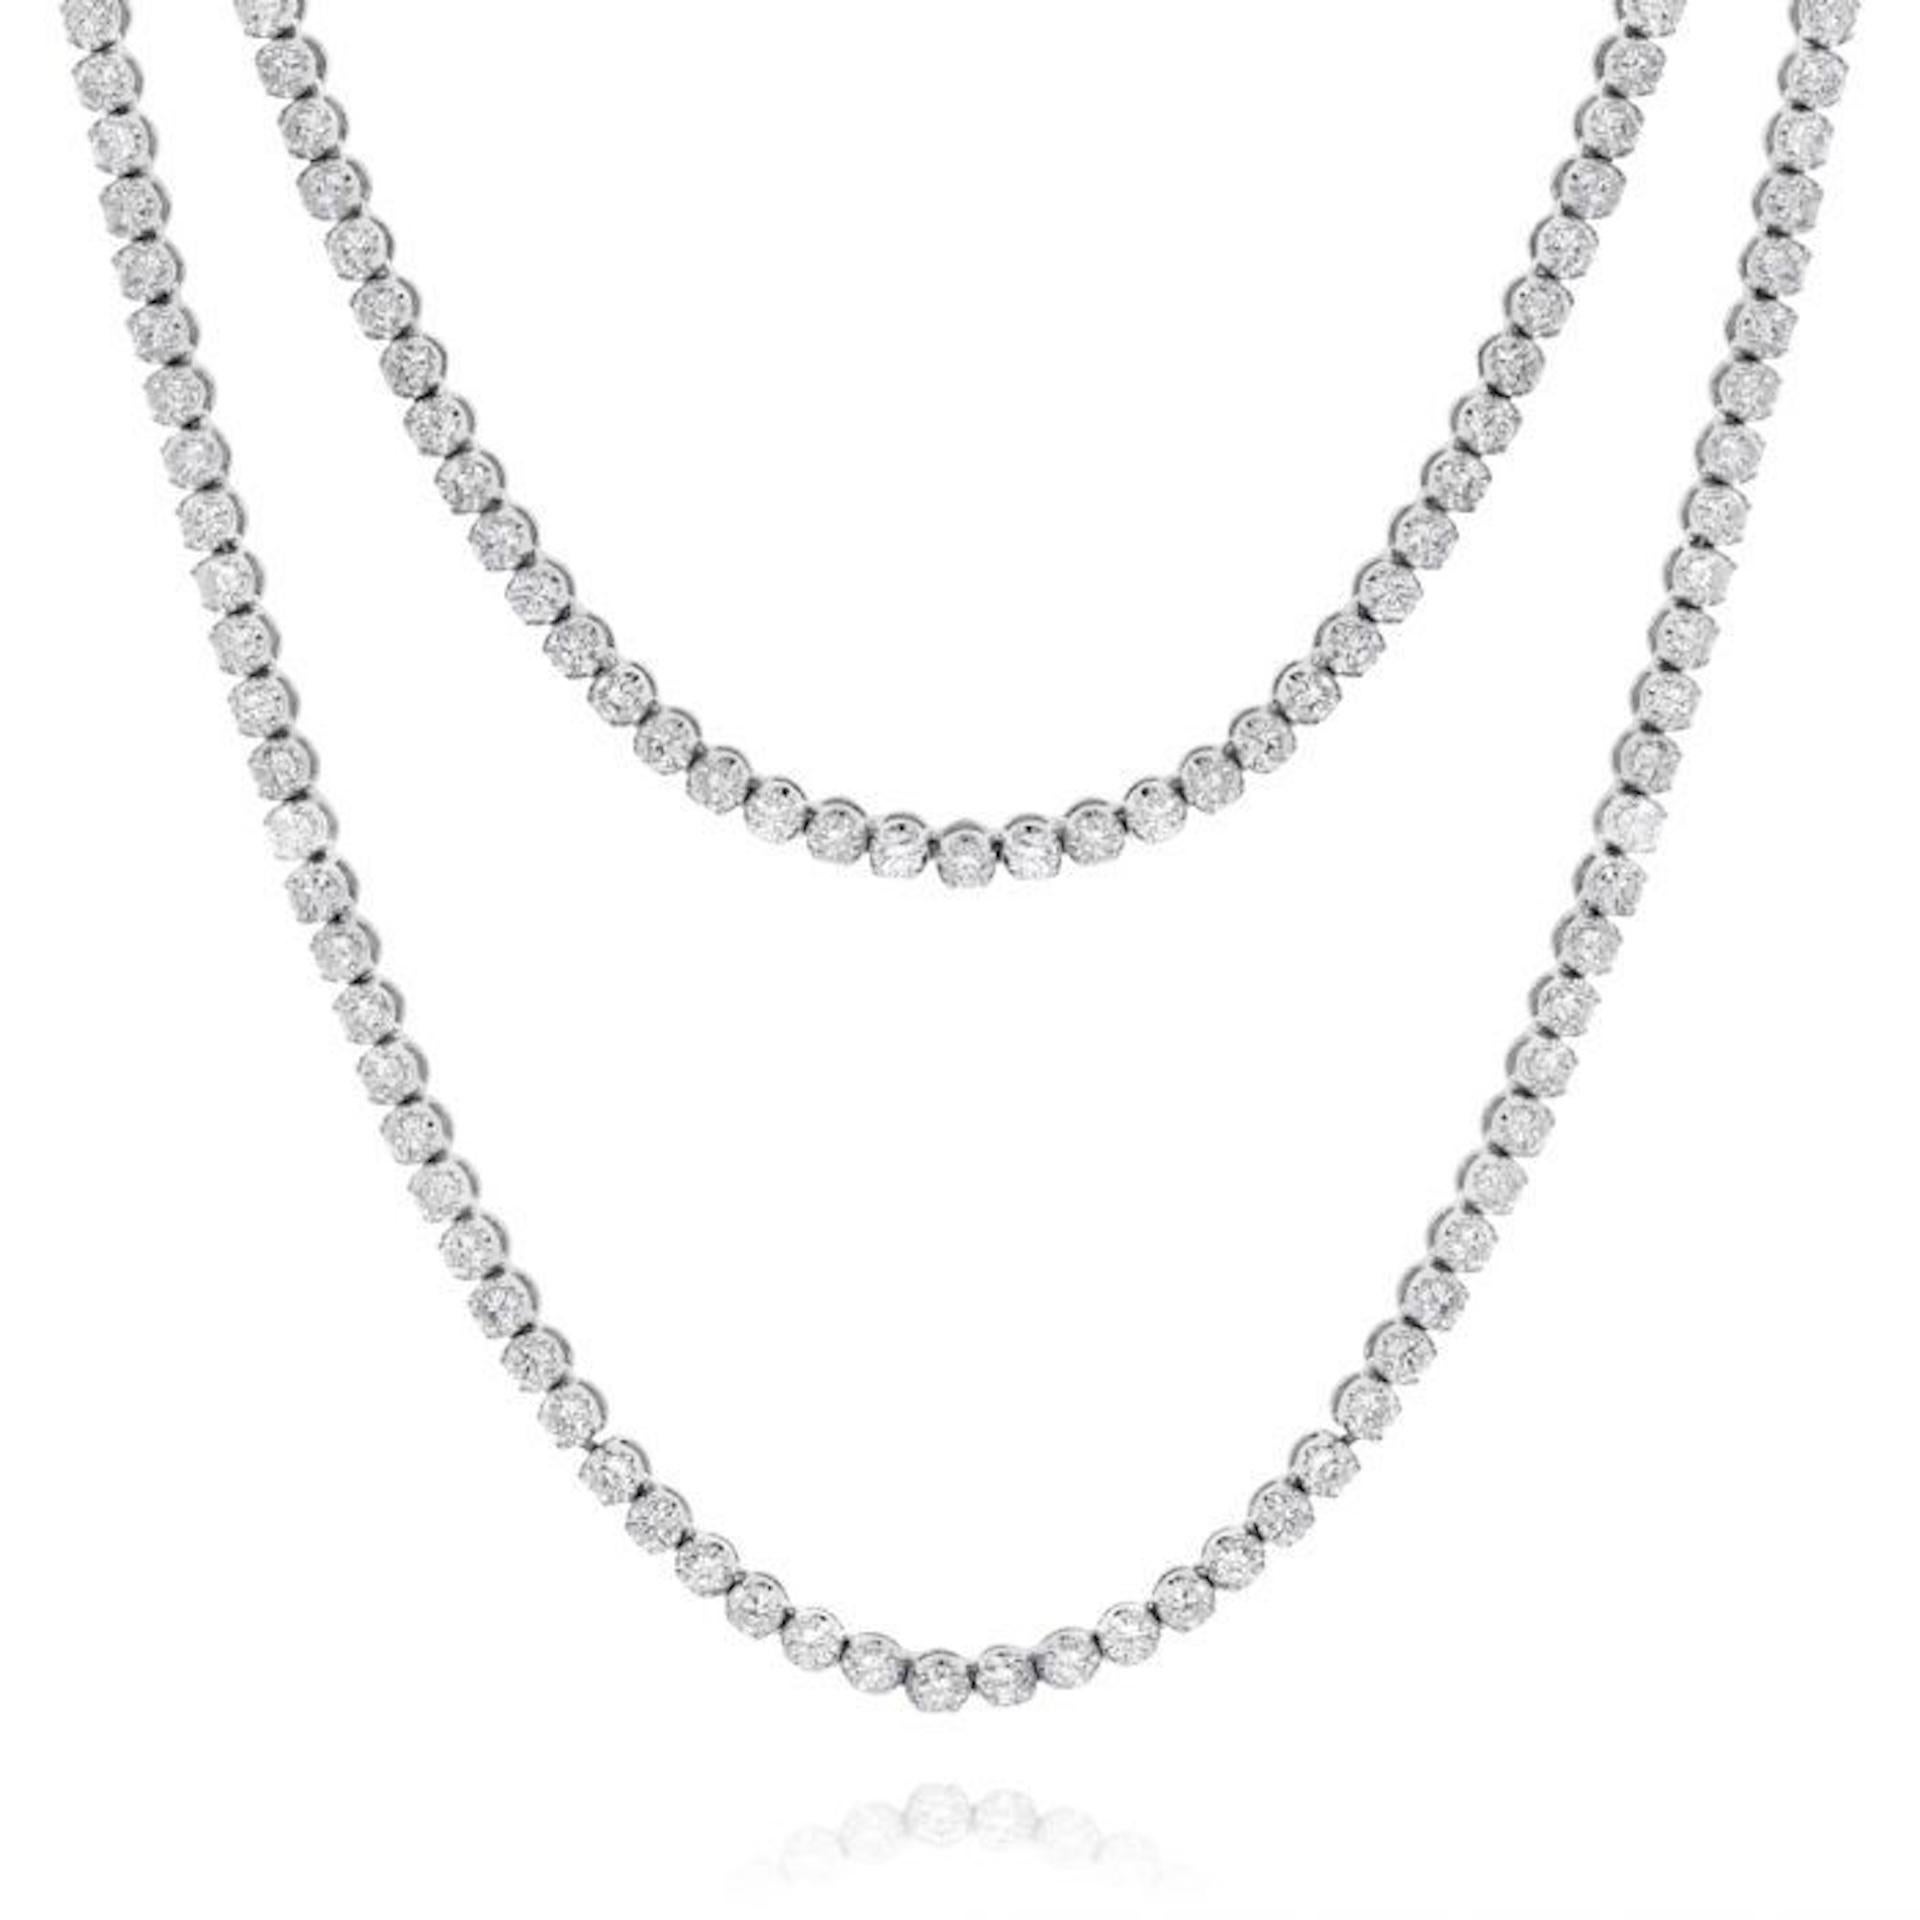 Custom 18k white gold diamond opera tennis necklace
16.80 cts round diamonds 196 stones 0.09 each FG color SI clarity.  Excellent Cut.